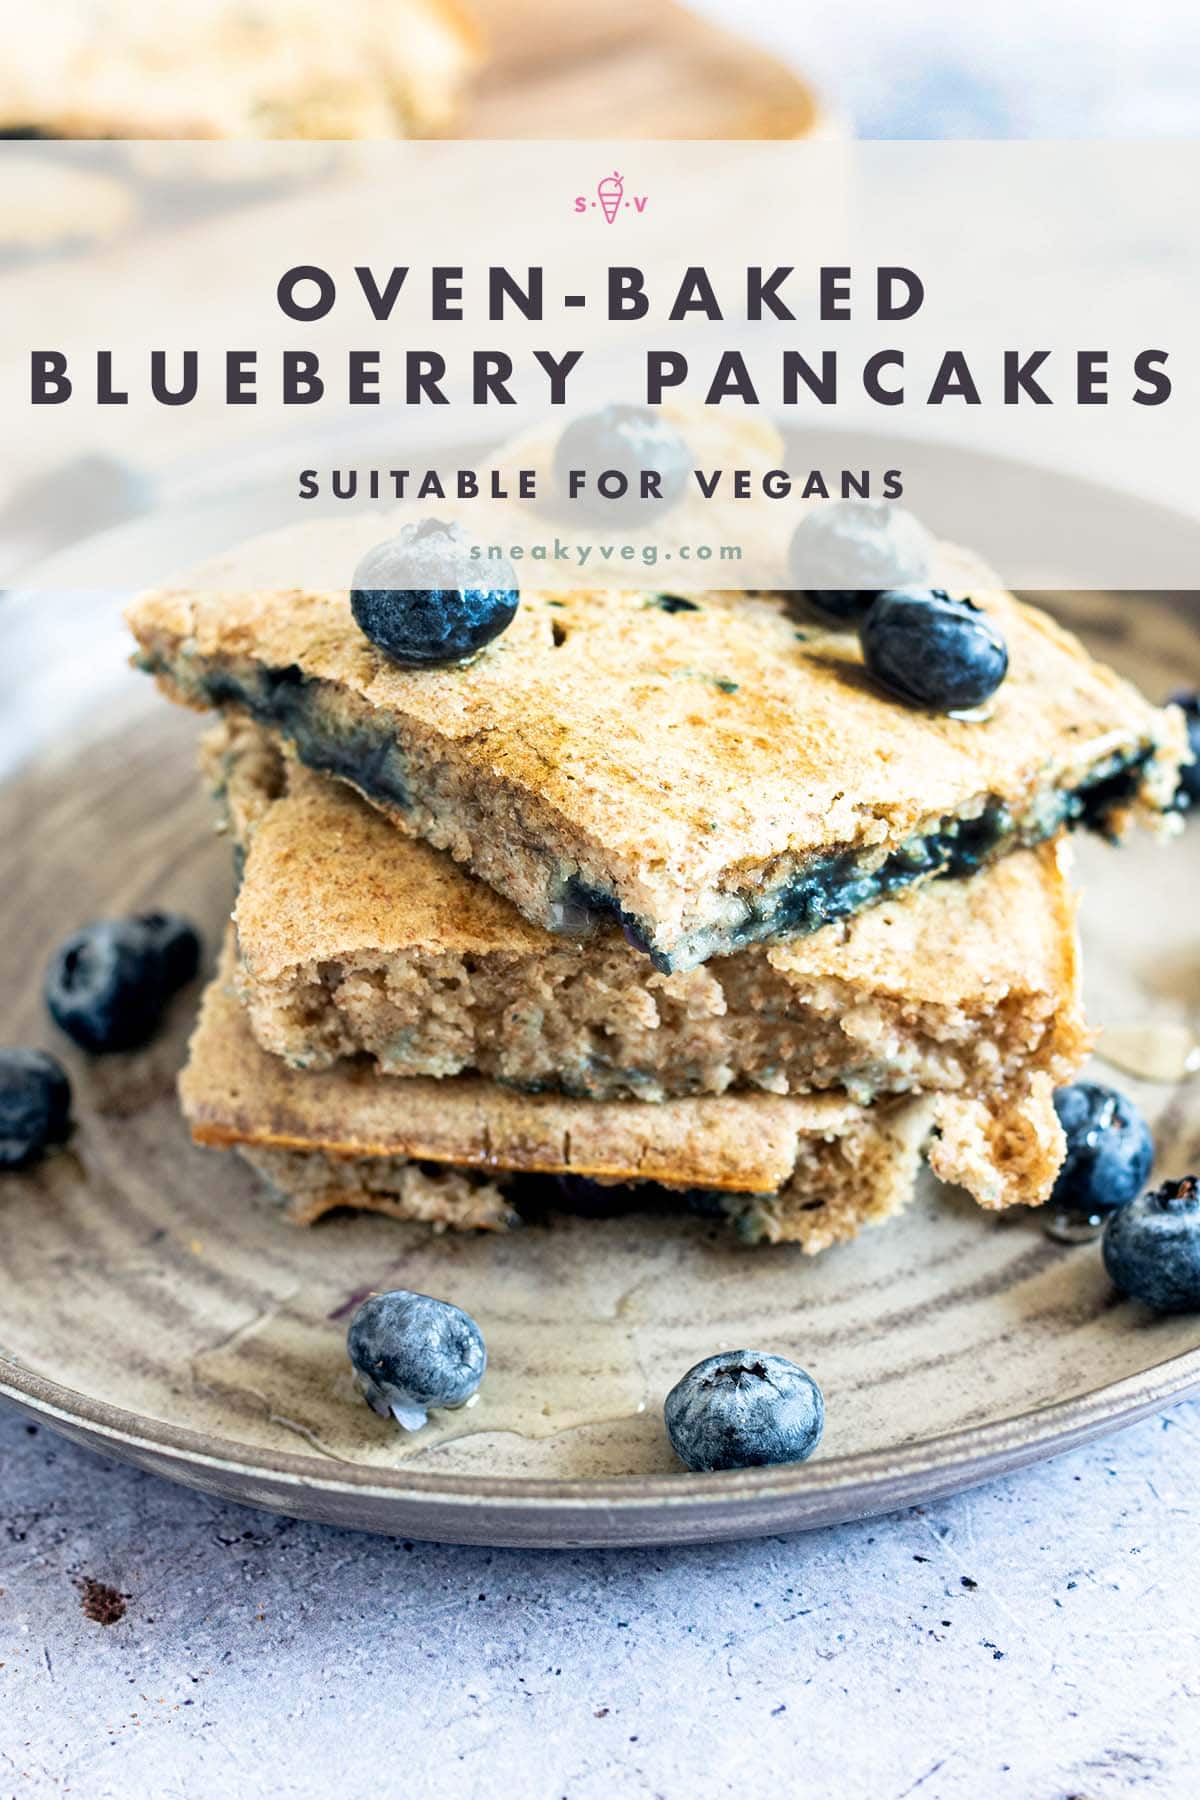 oven baked blueberry pancakes stacked on plate with blueberries